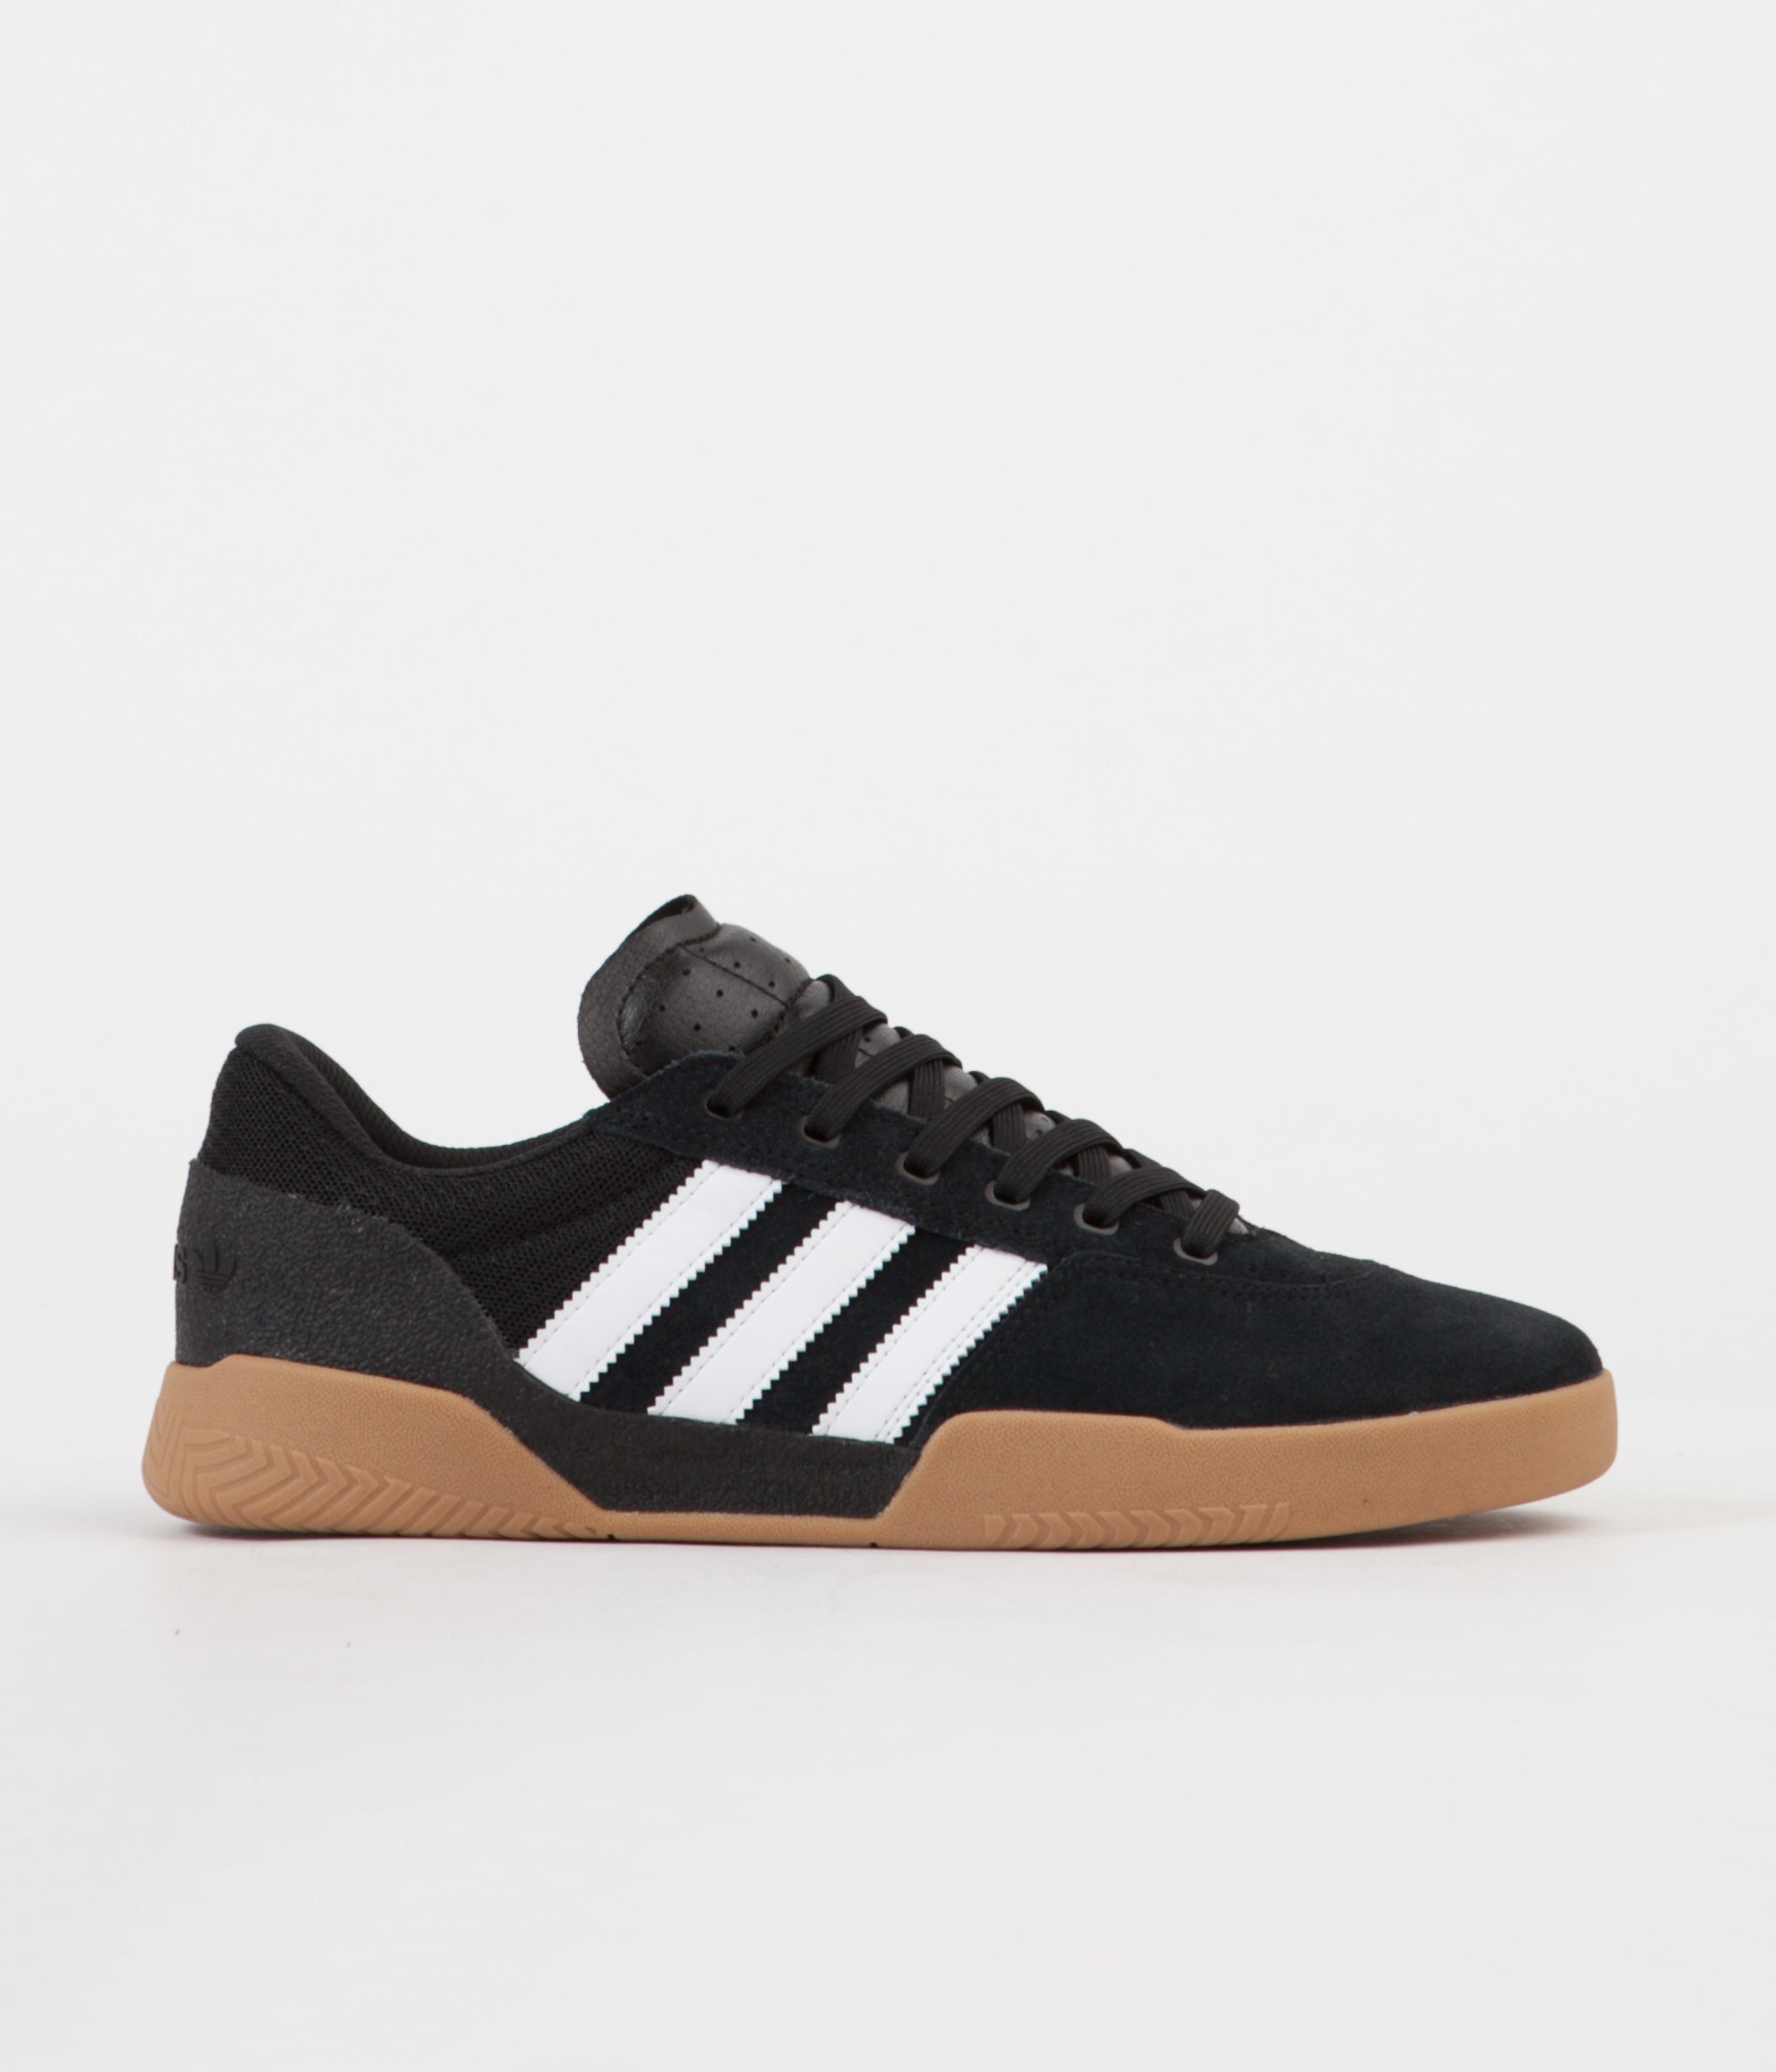 black and brown adidas